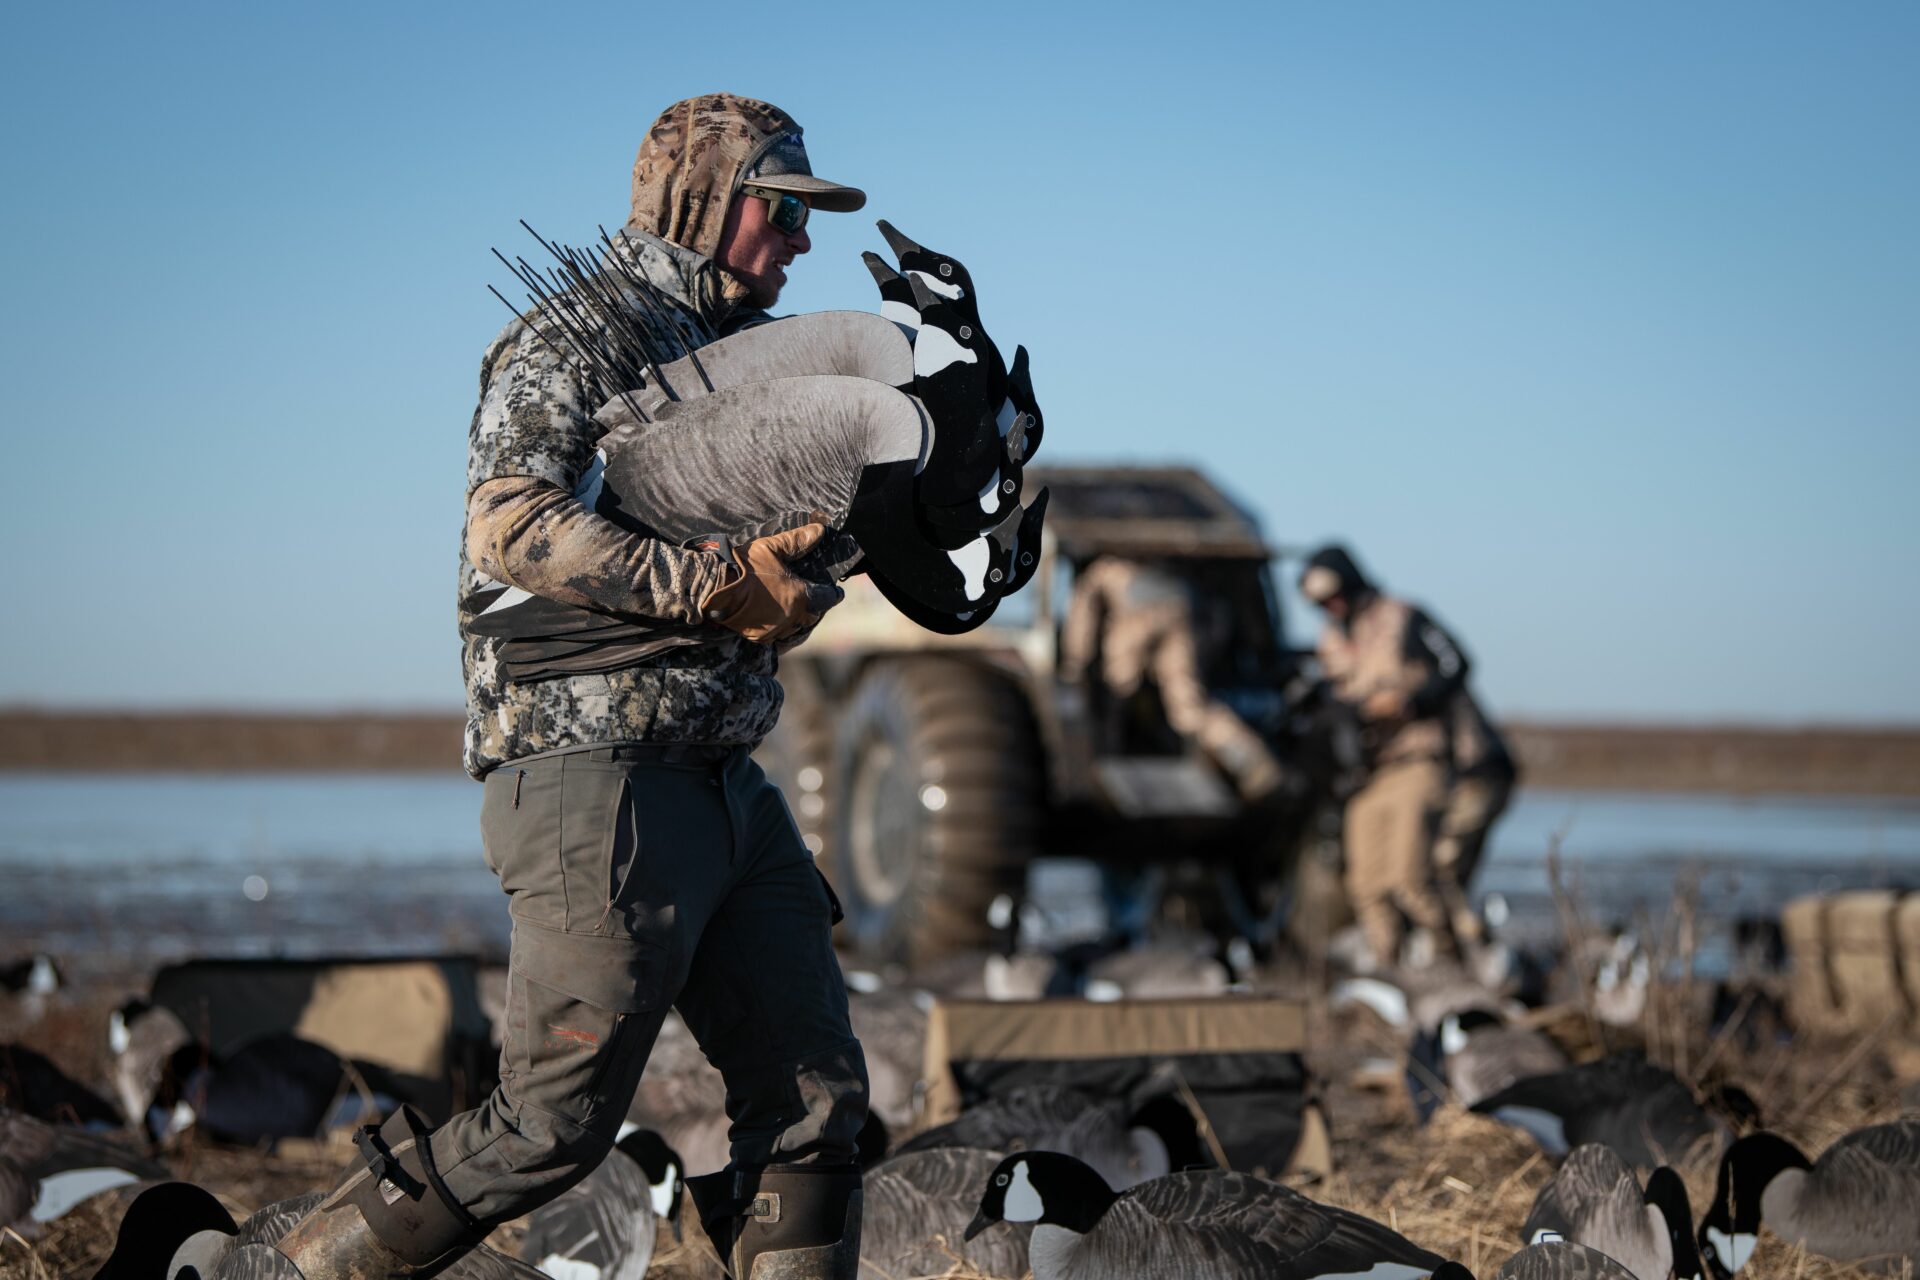 Silhouette decoys: Everything you need to know